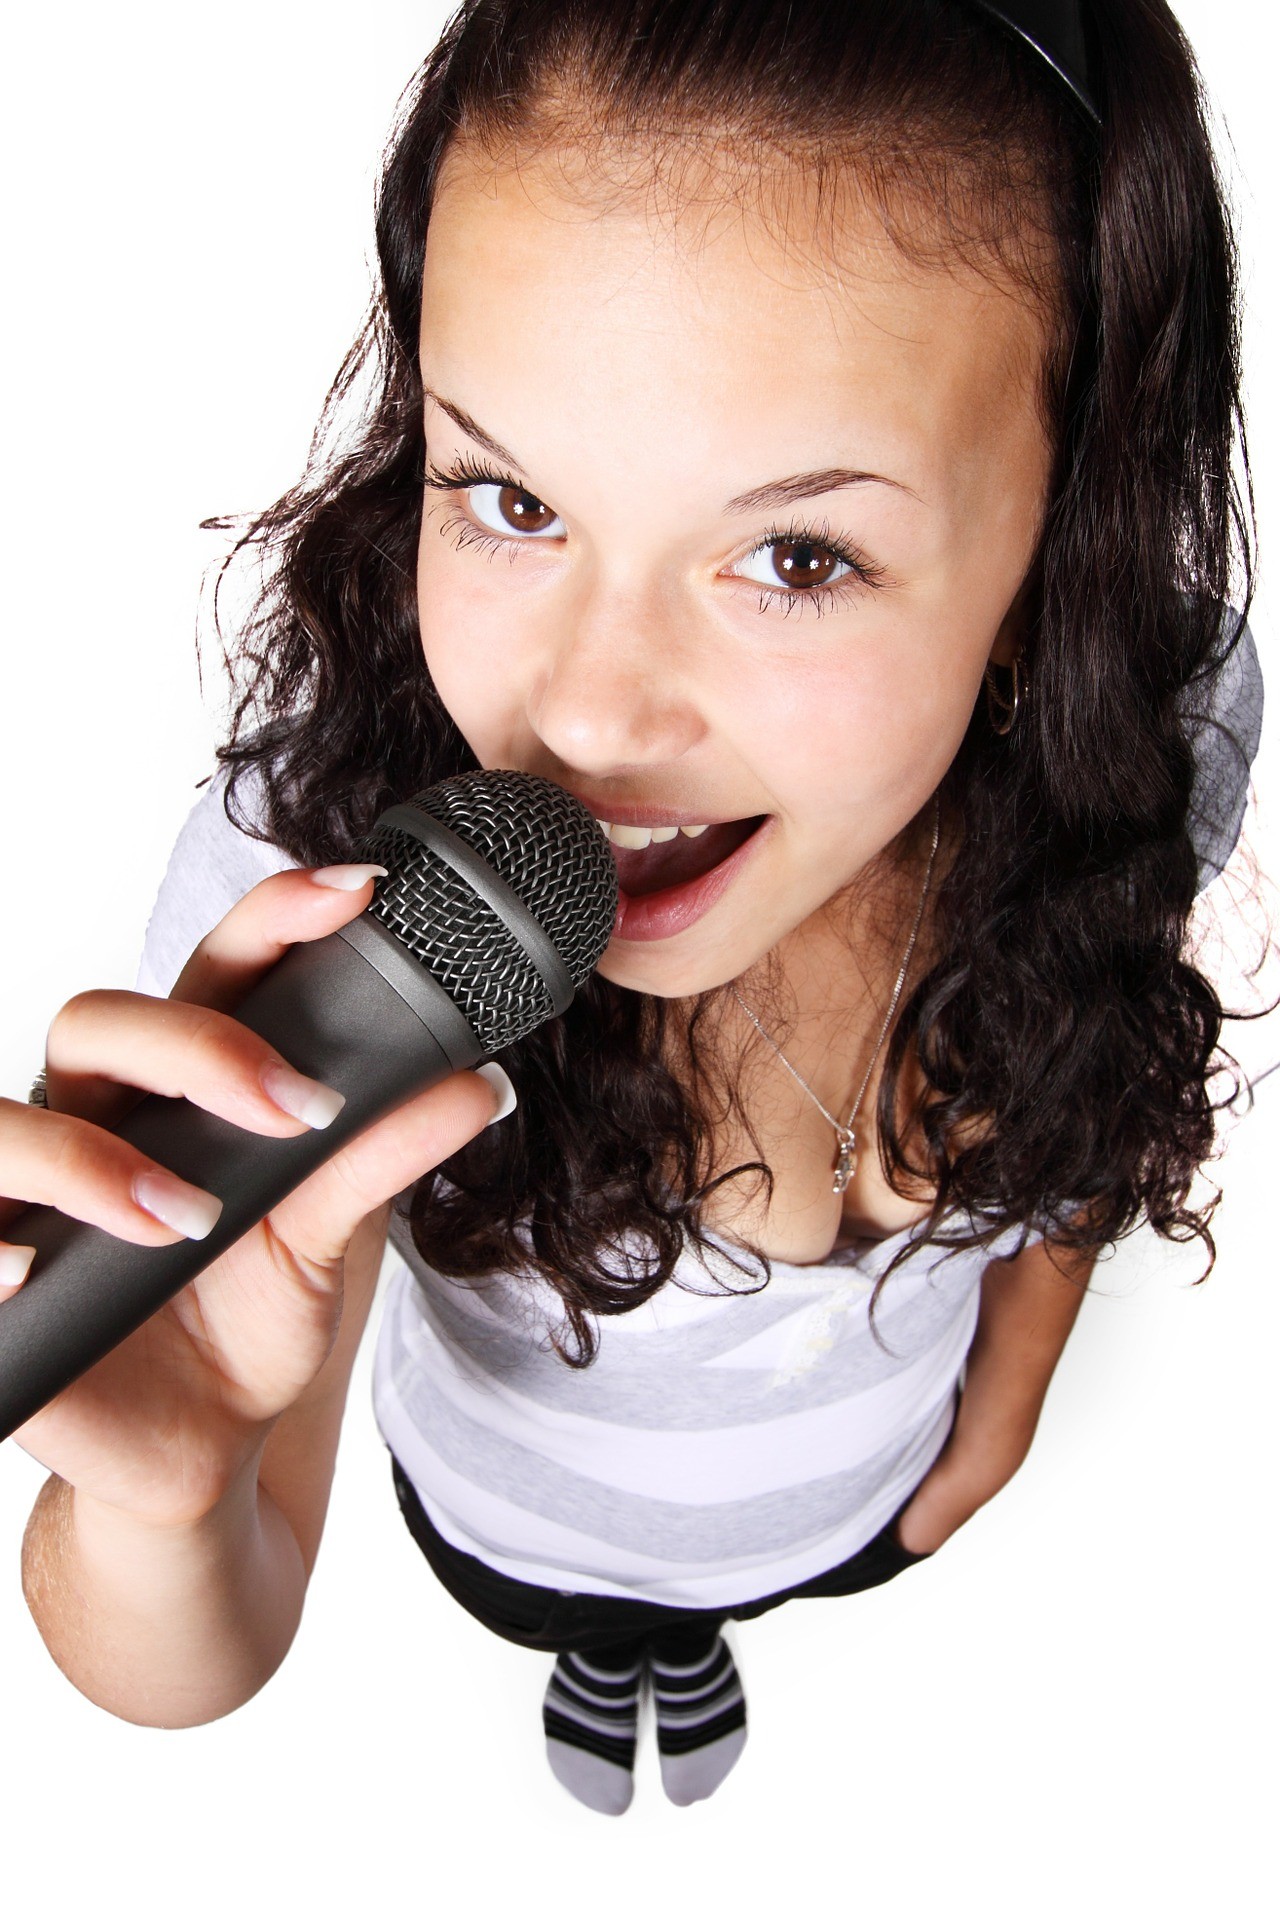 Photograph of a girl singing a song